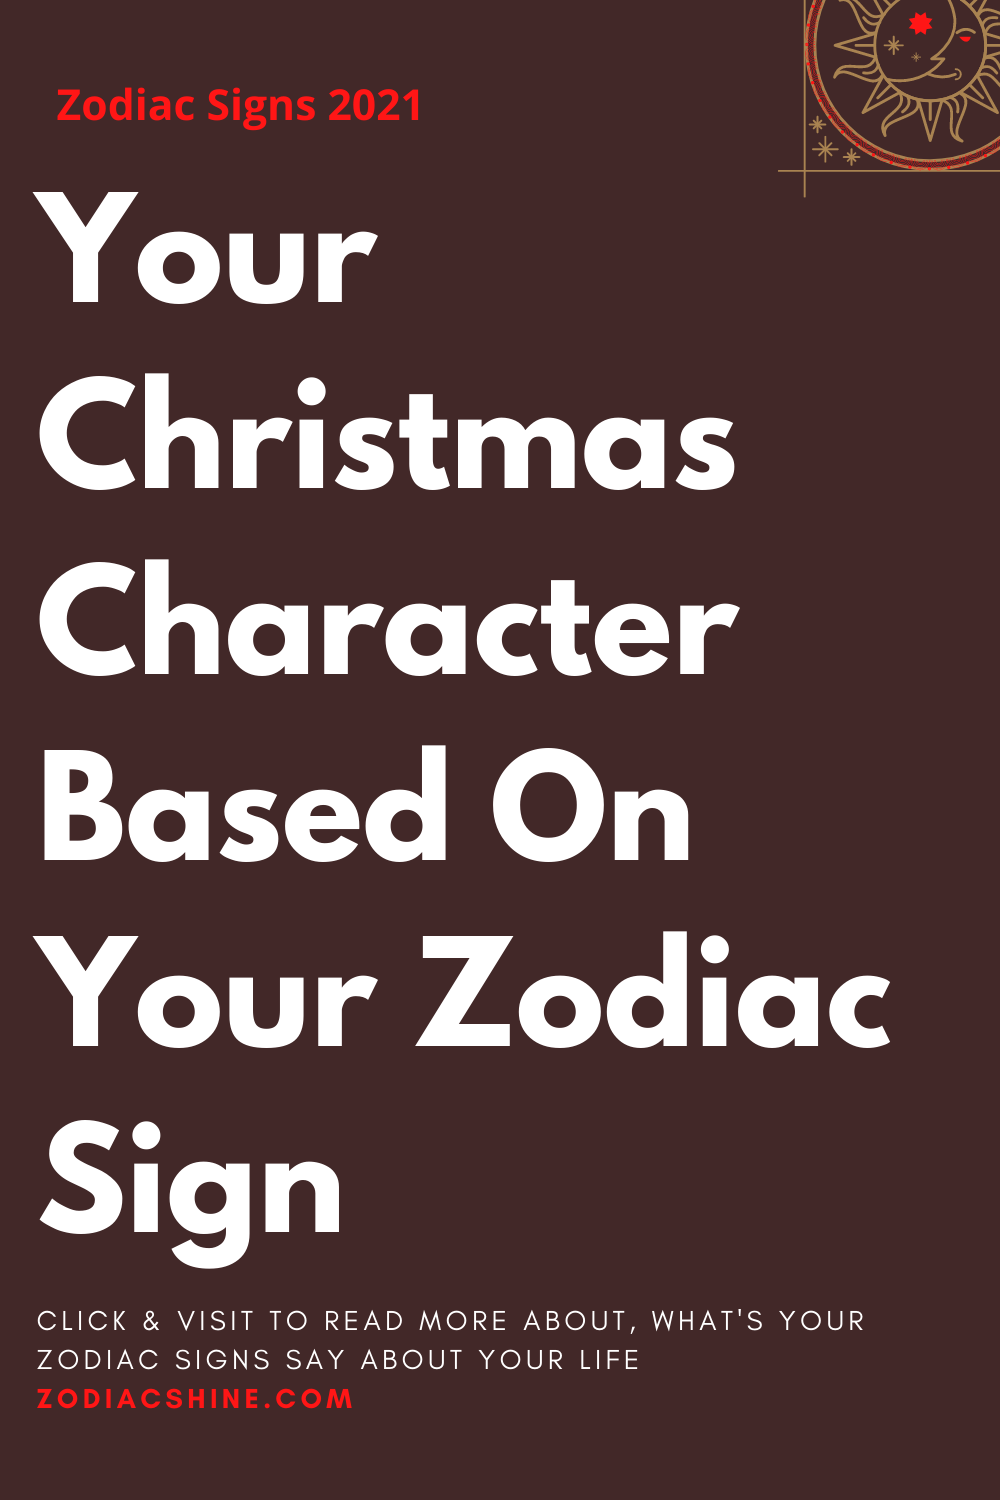 Your Christmas Character Based On Your Zodiac Sign